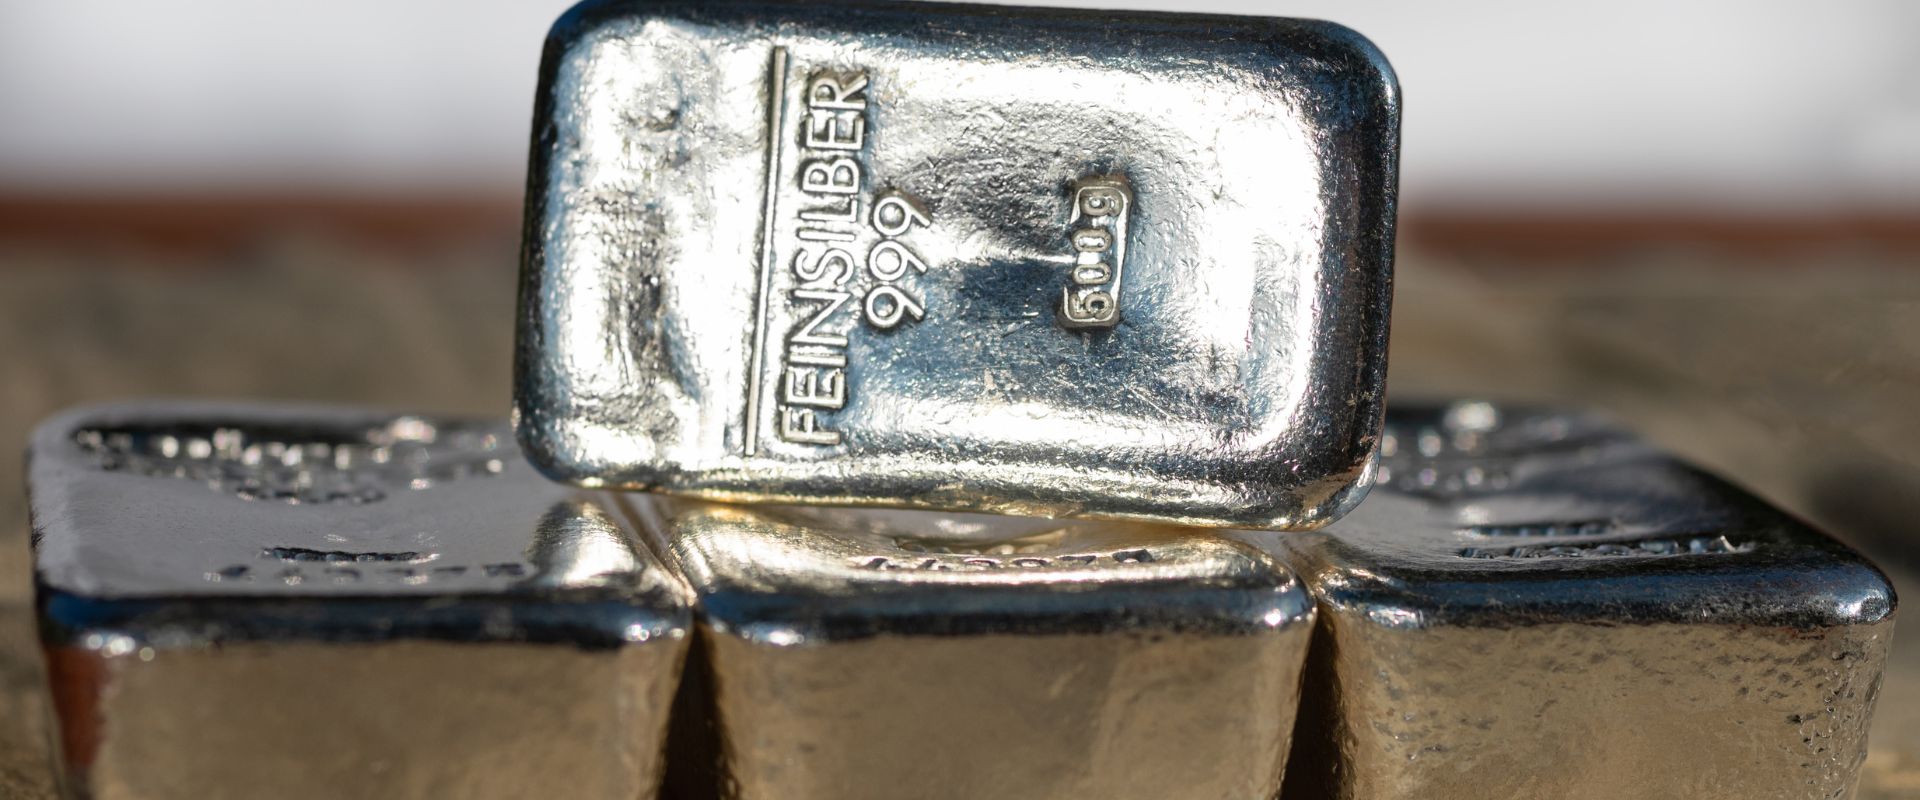 four cast silver bars against the blurred background